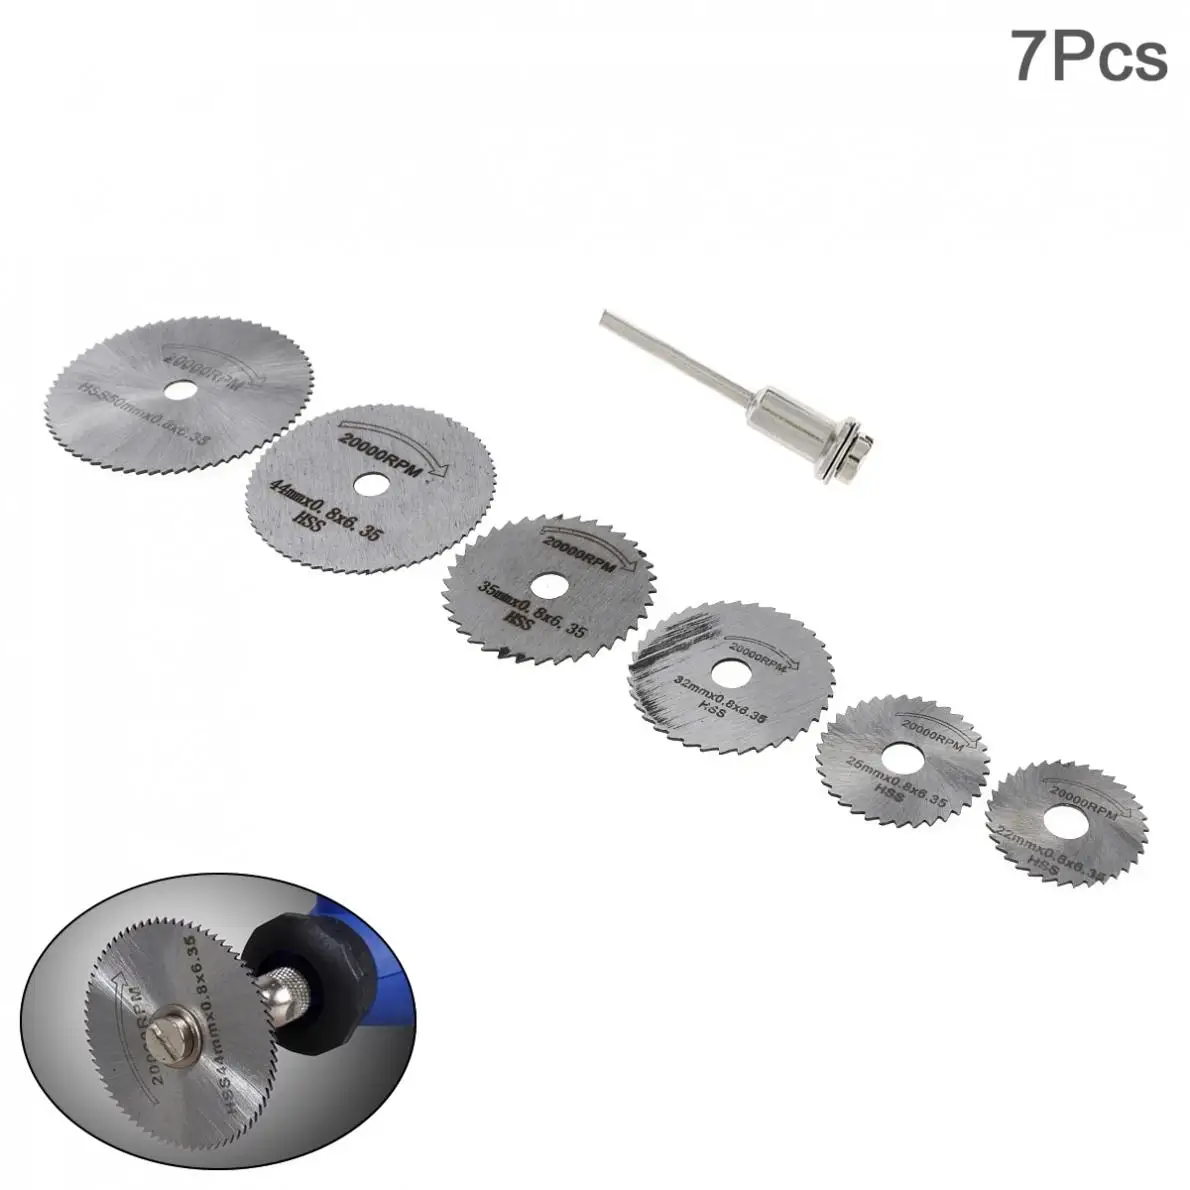 7pcs/lot Mini Wood Saw Blade Circular Blade Jig Saw Rotary Tool for Cutter Power Tool Set Wood Cutting Discs honhill 52cc gasoline chainsaw petrol engine chainsaw power saw wood cutter cutting grindling machine 2 stroke with saw chain